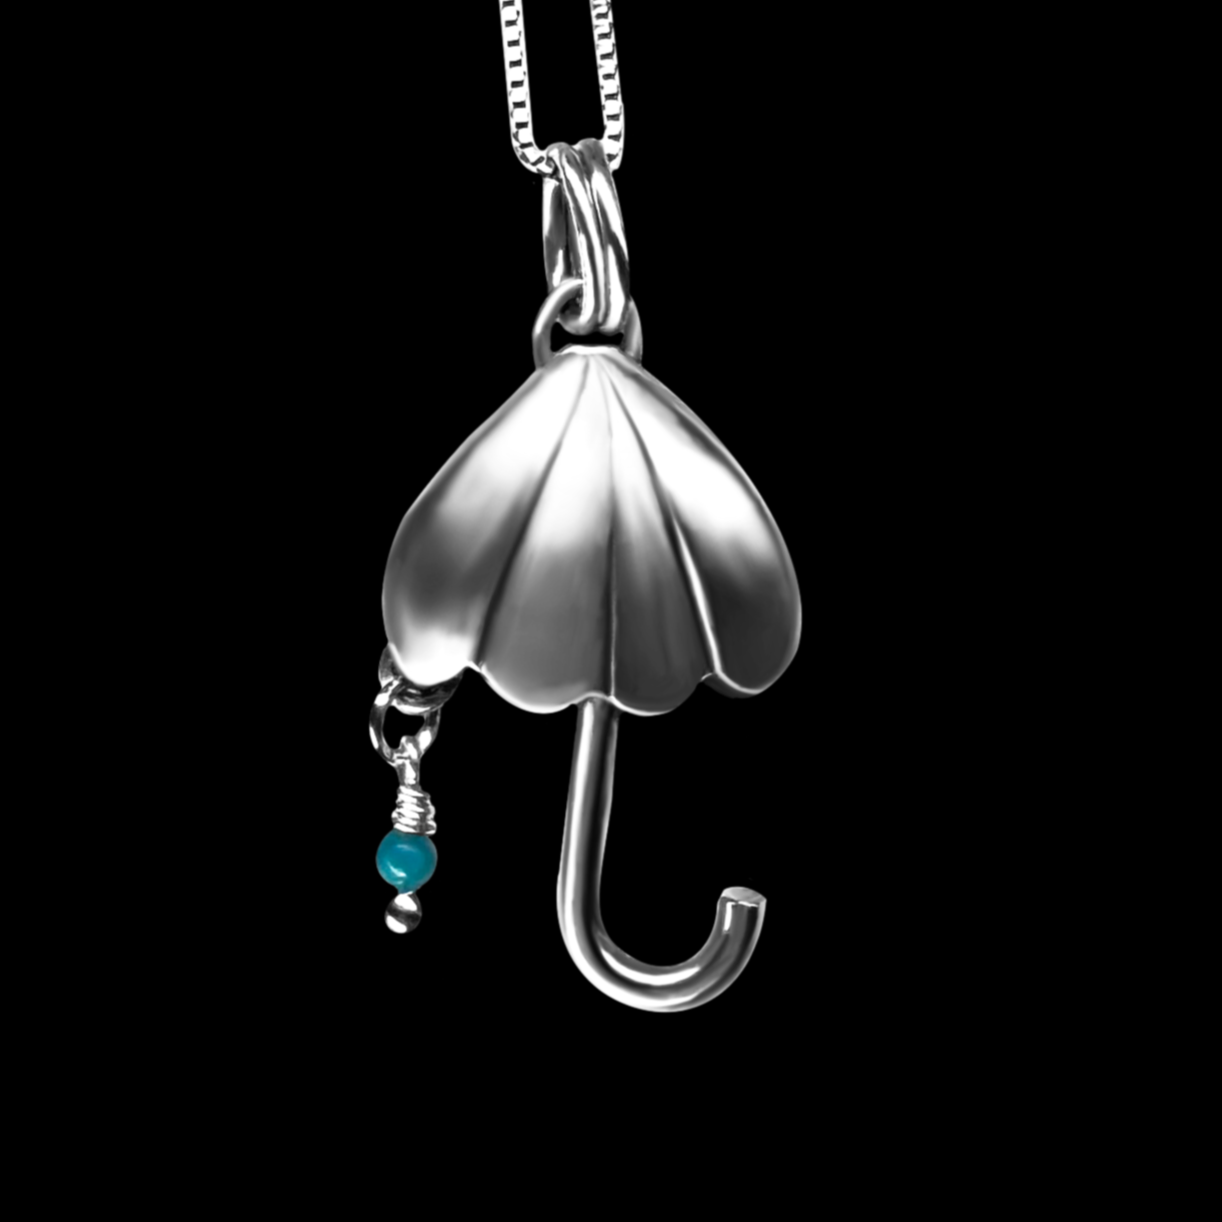 "Naya" Turquoise & Sterling Silver Umbrella Necklace